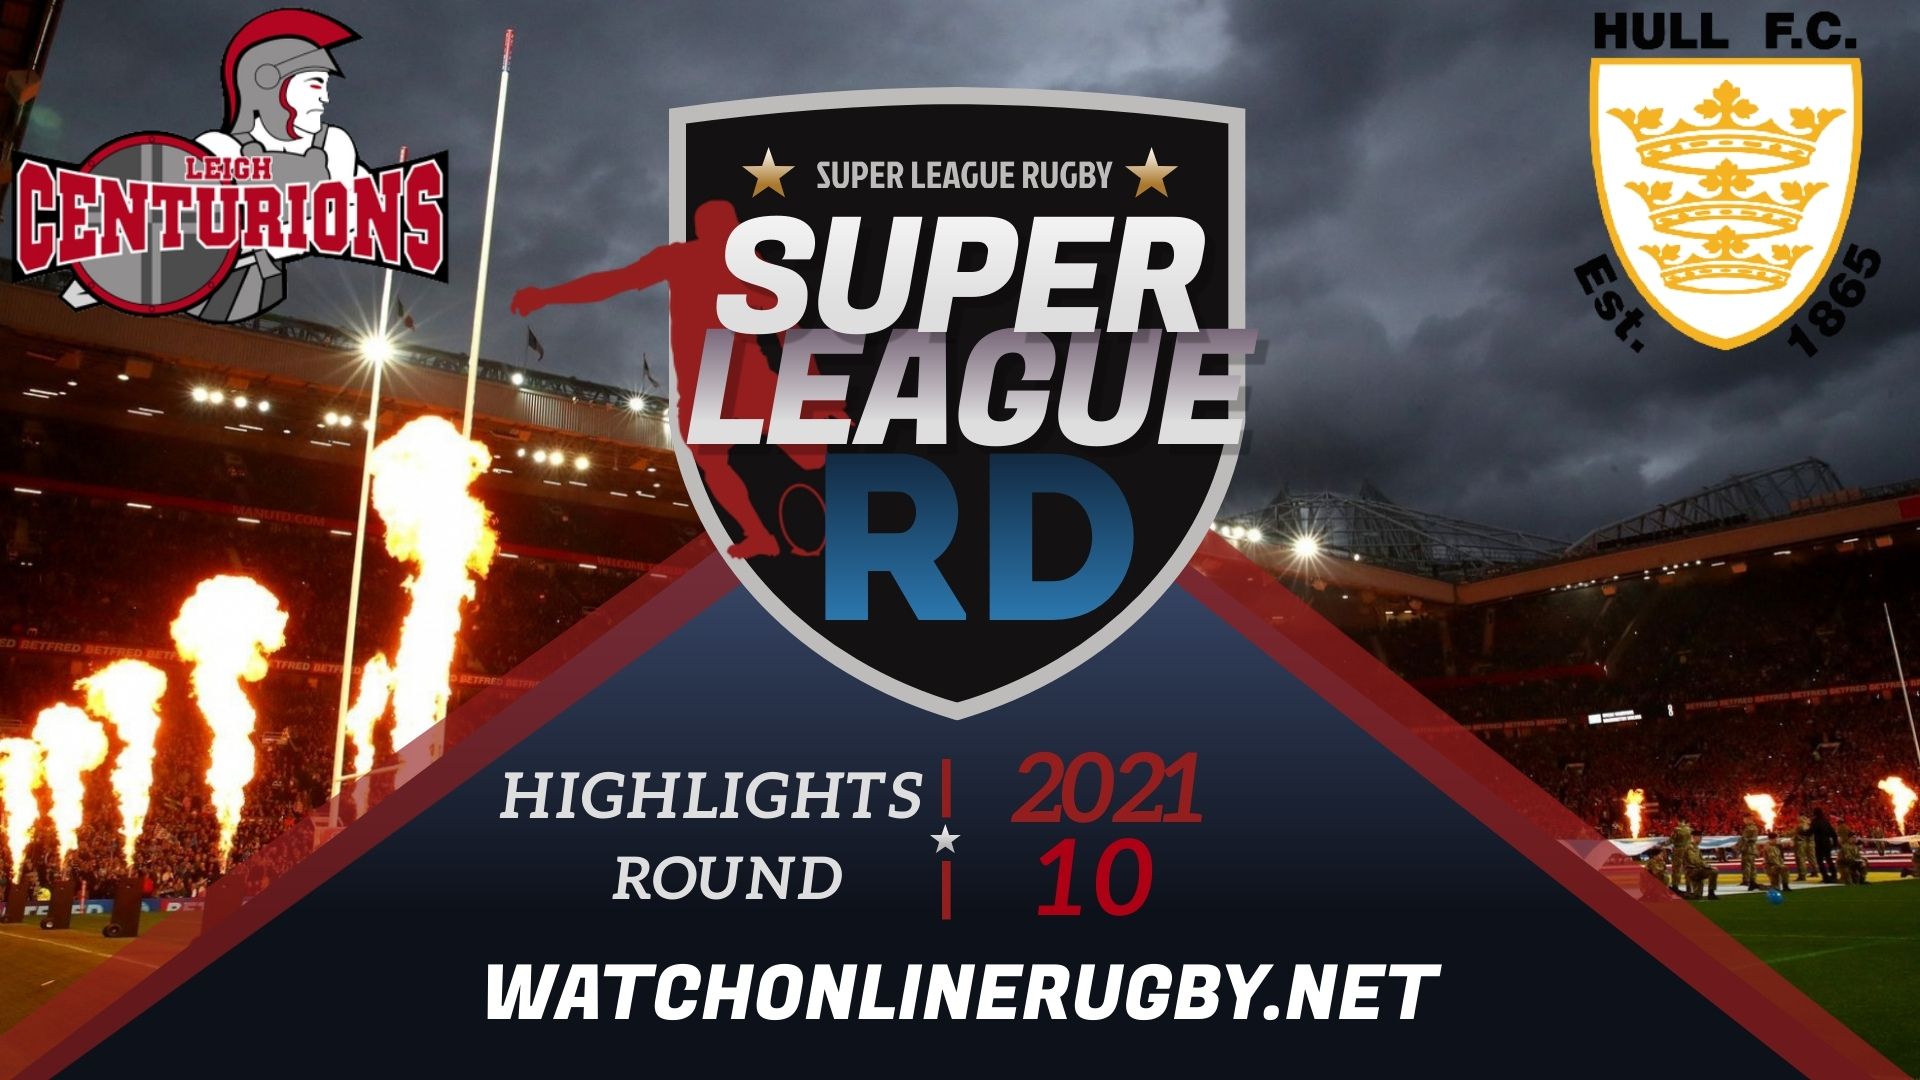 Leigh Centurions Vs Hull FC Super League Rugby 2021 RD 10